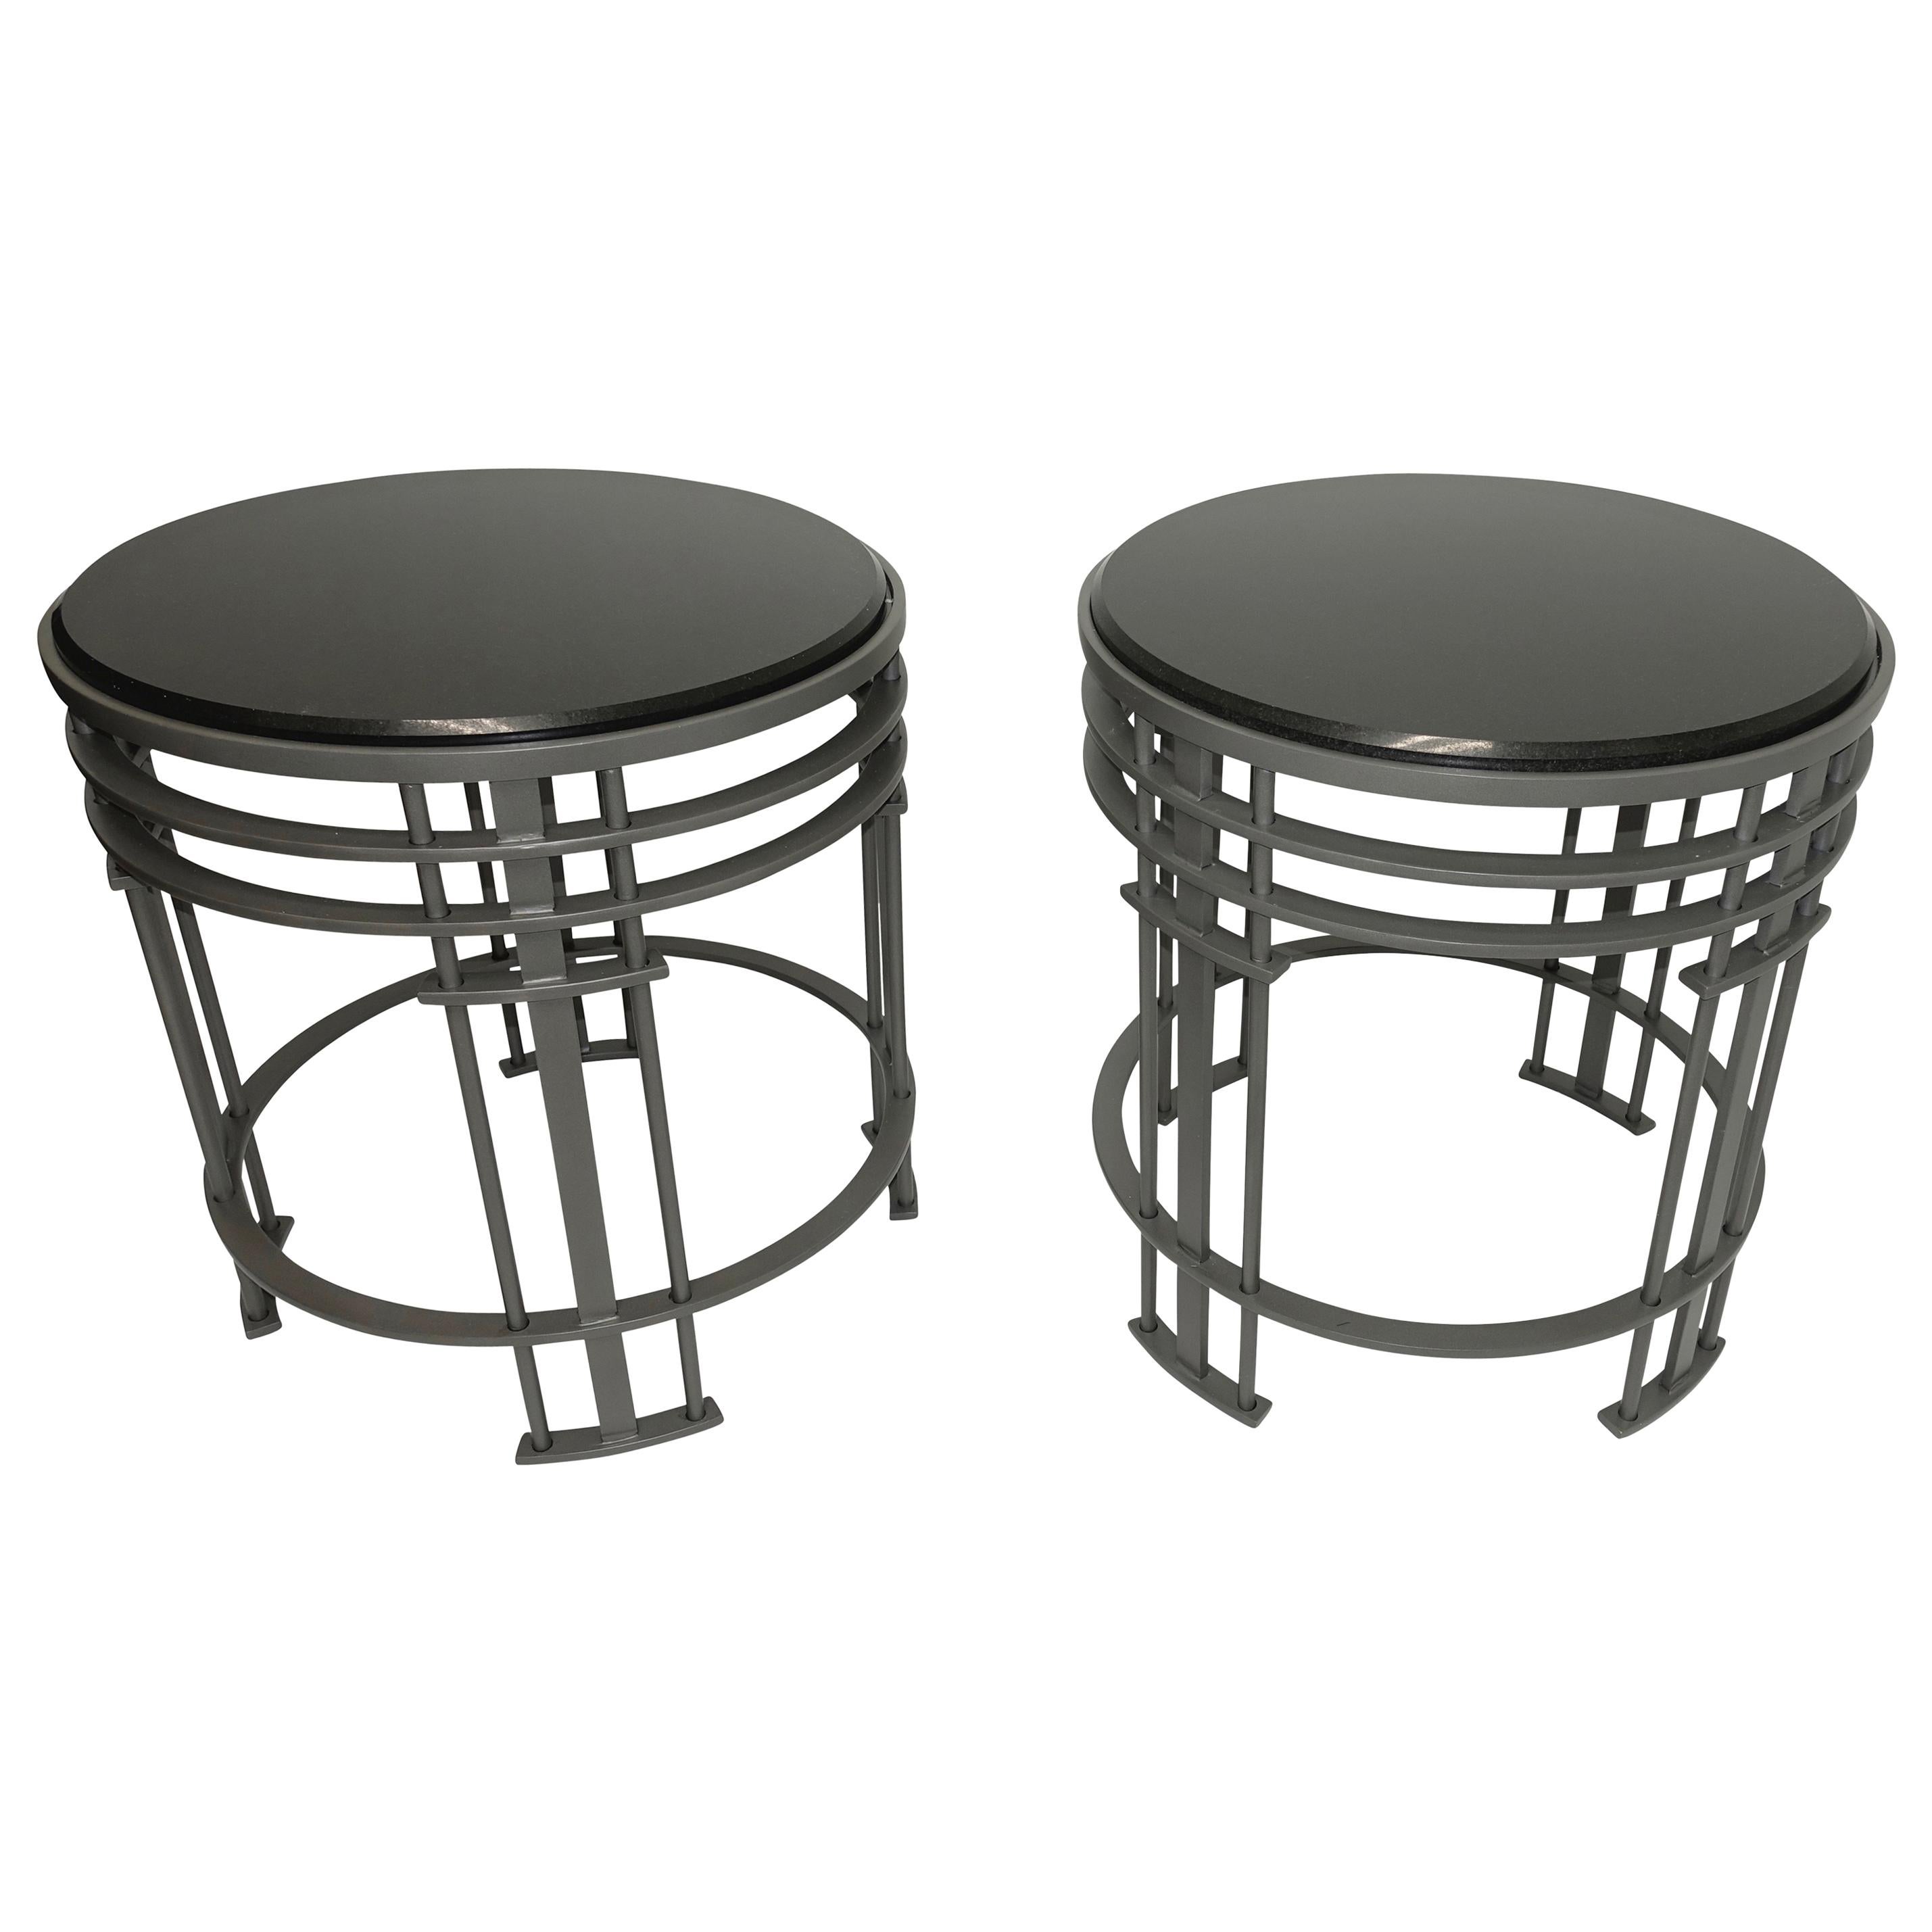 Pair of Streamline Modern Round Side Tables with Black Granite Tops